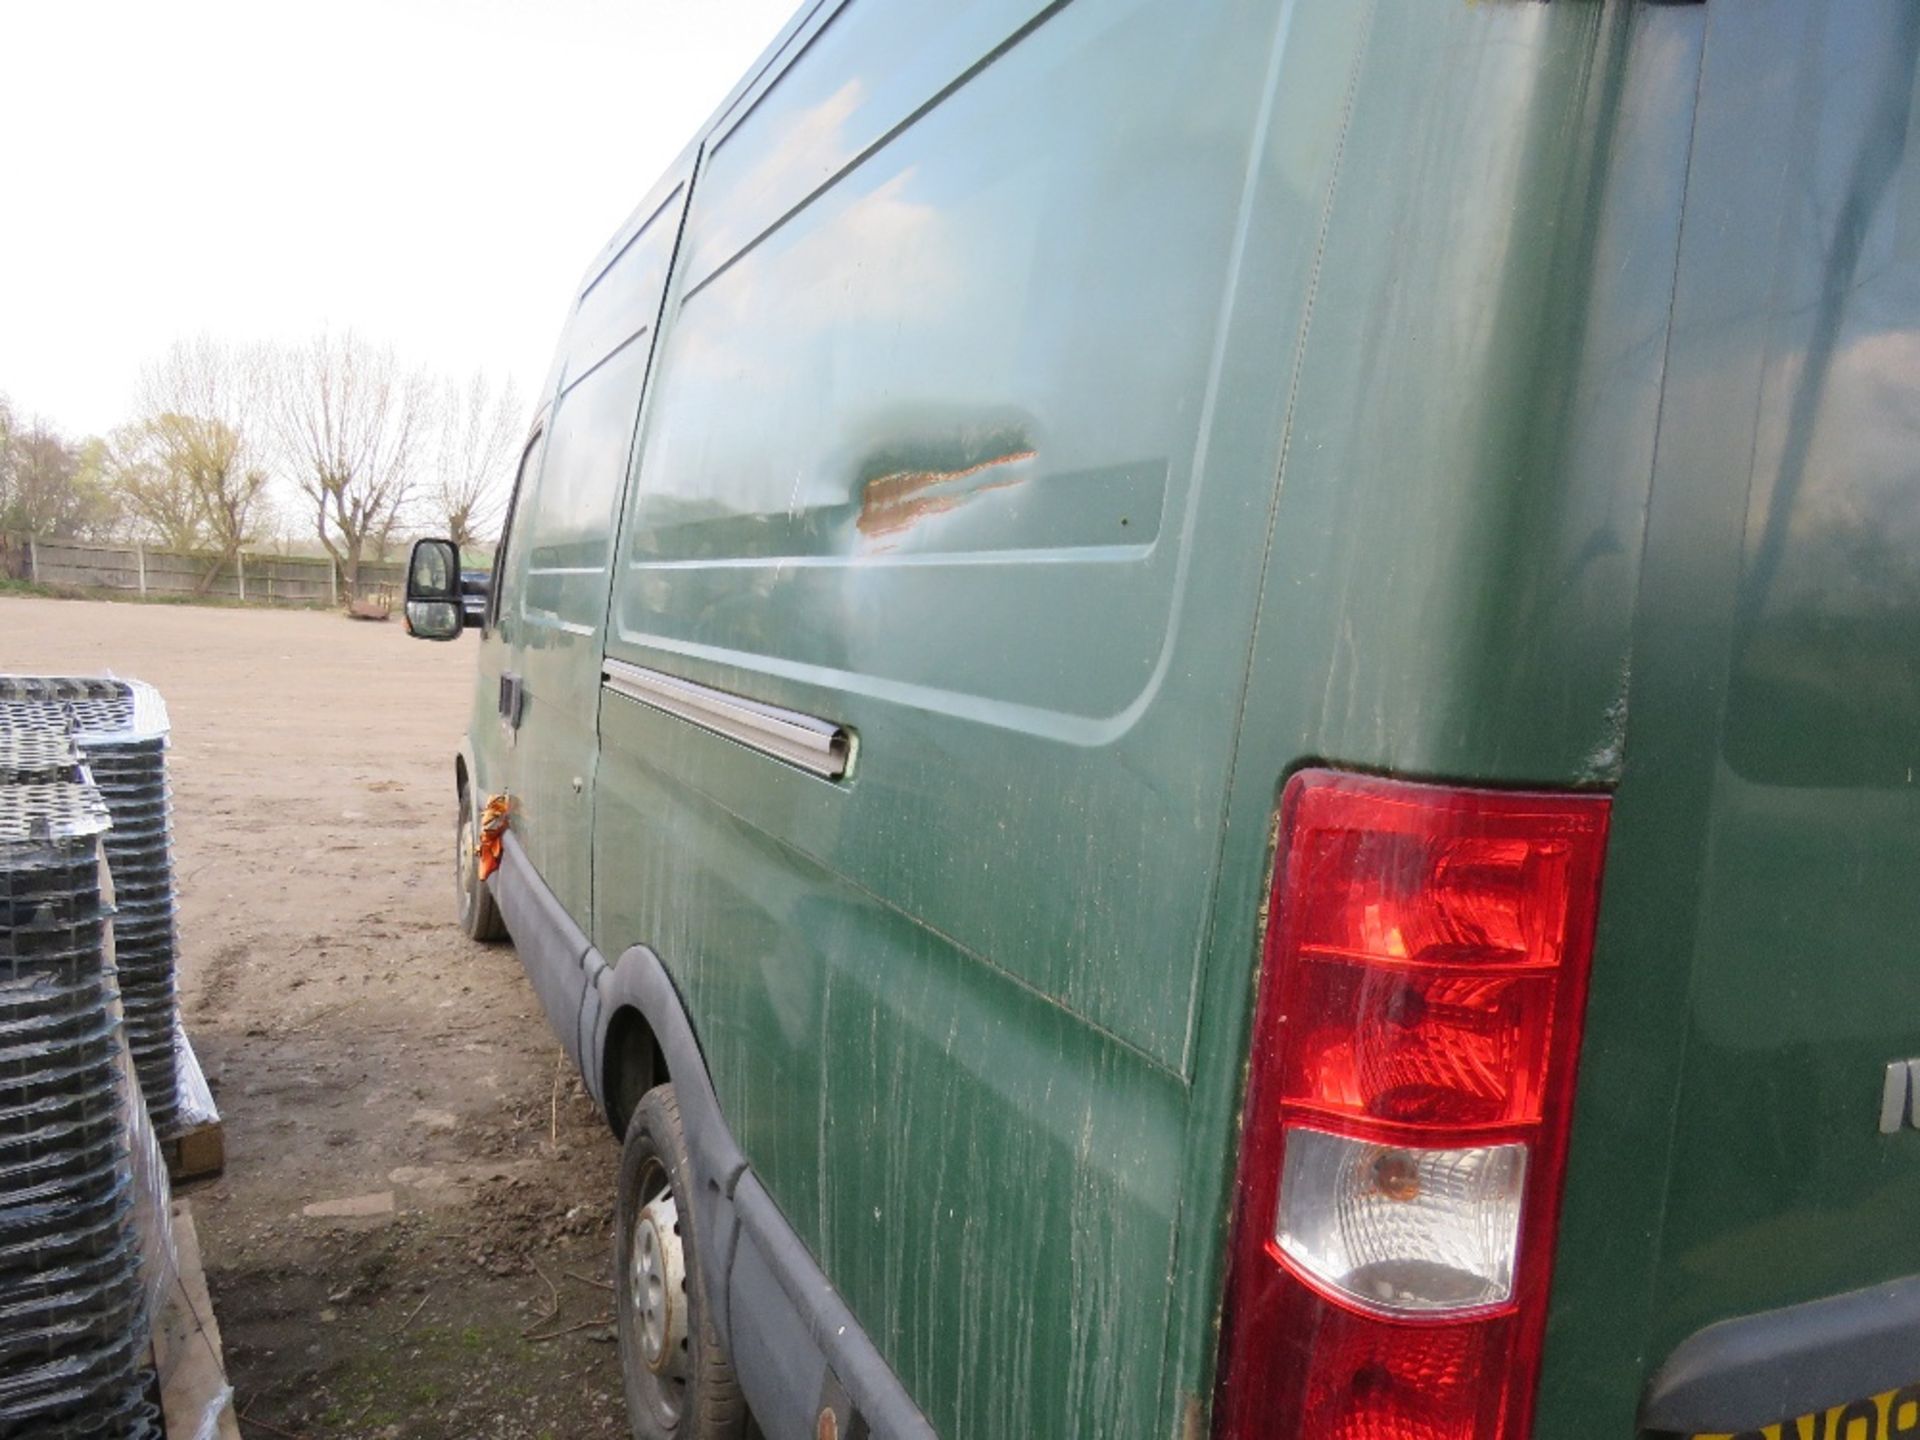 IVECO 35.125 PANEL VAN WITH HIGH ROOF REG:GN08 JTX. MOT EXPIRED, V5 TO APPLY FOR. WHEN TESTED WAS SE - Image 7 of 9